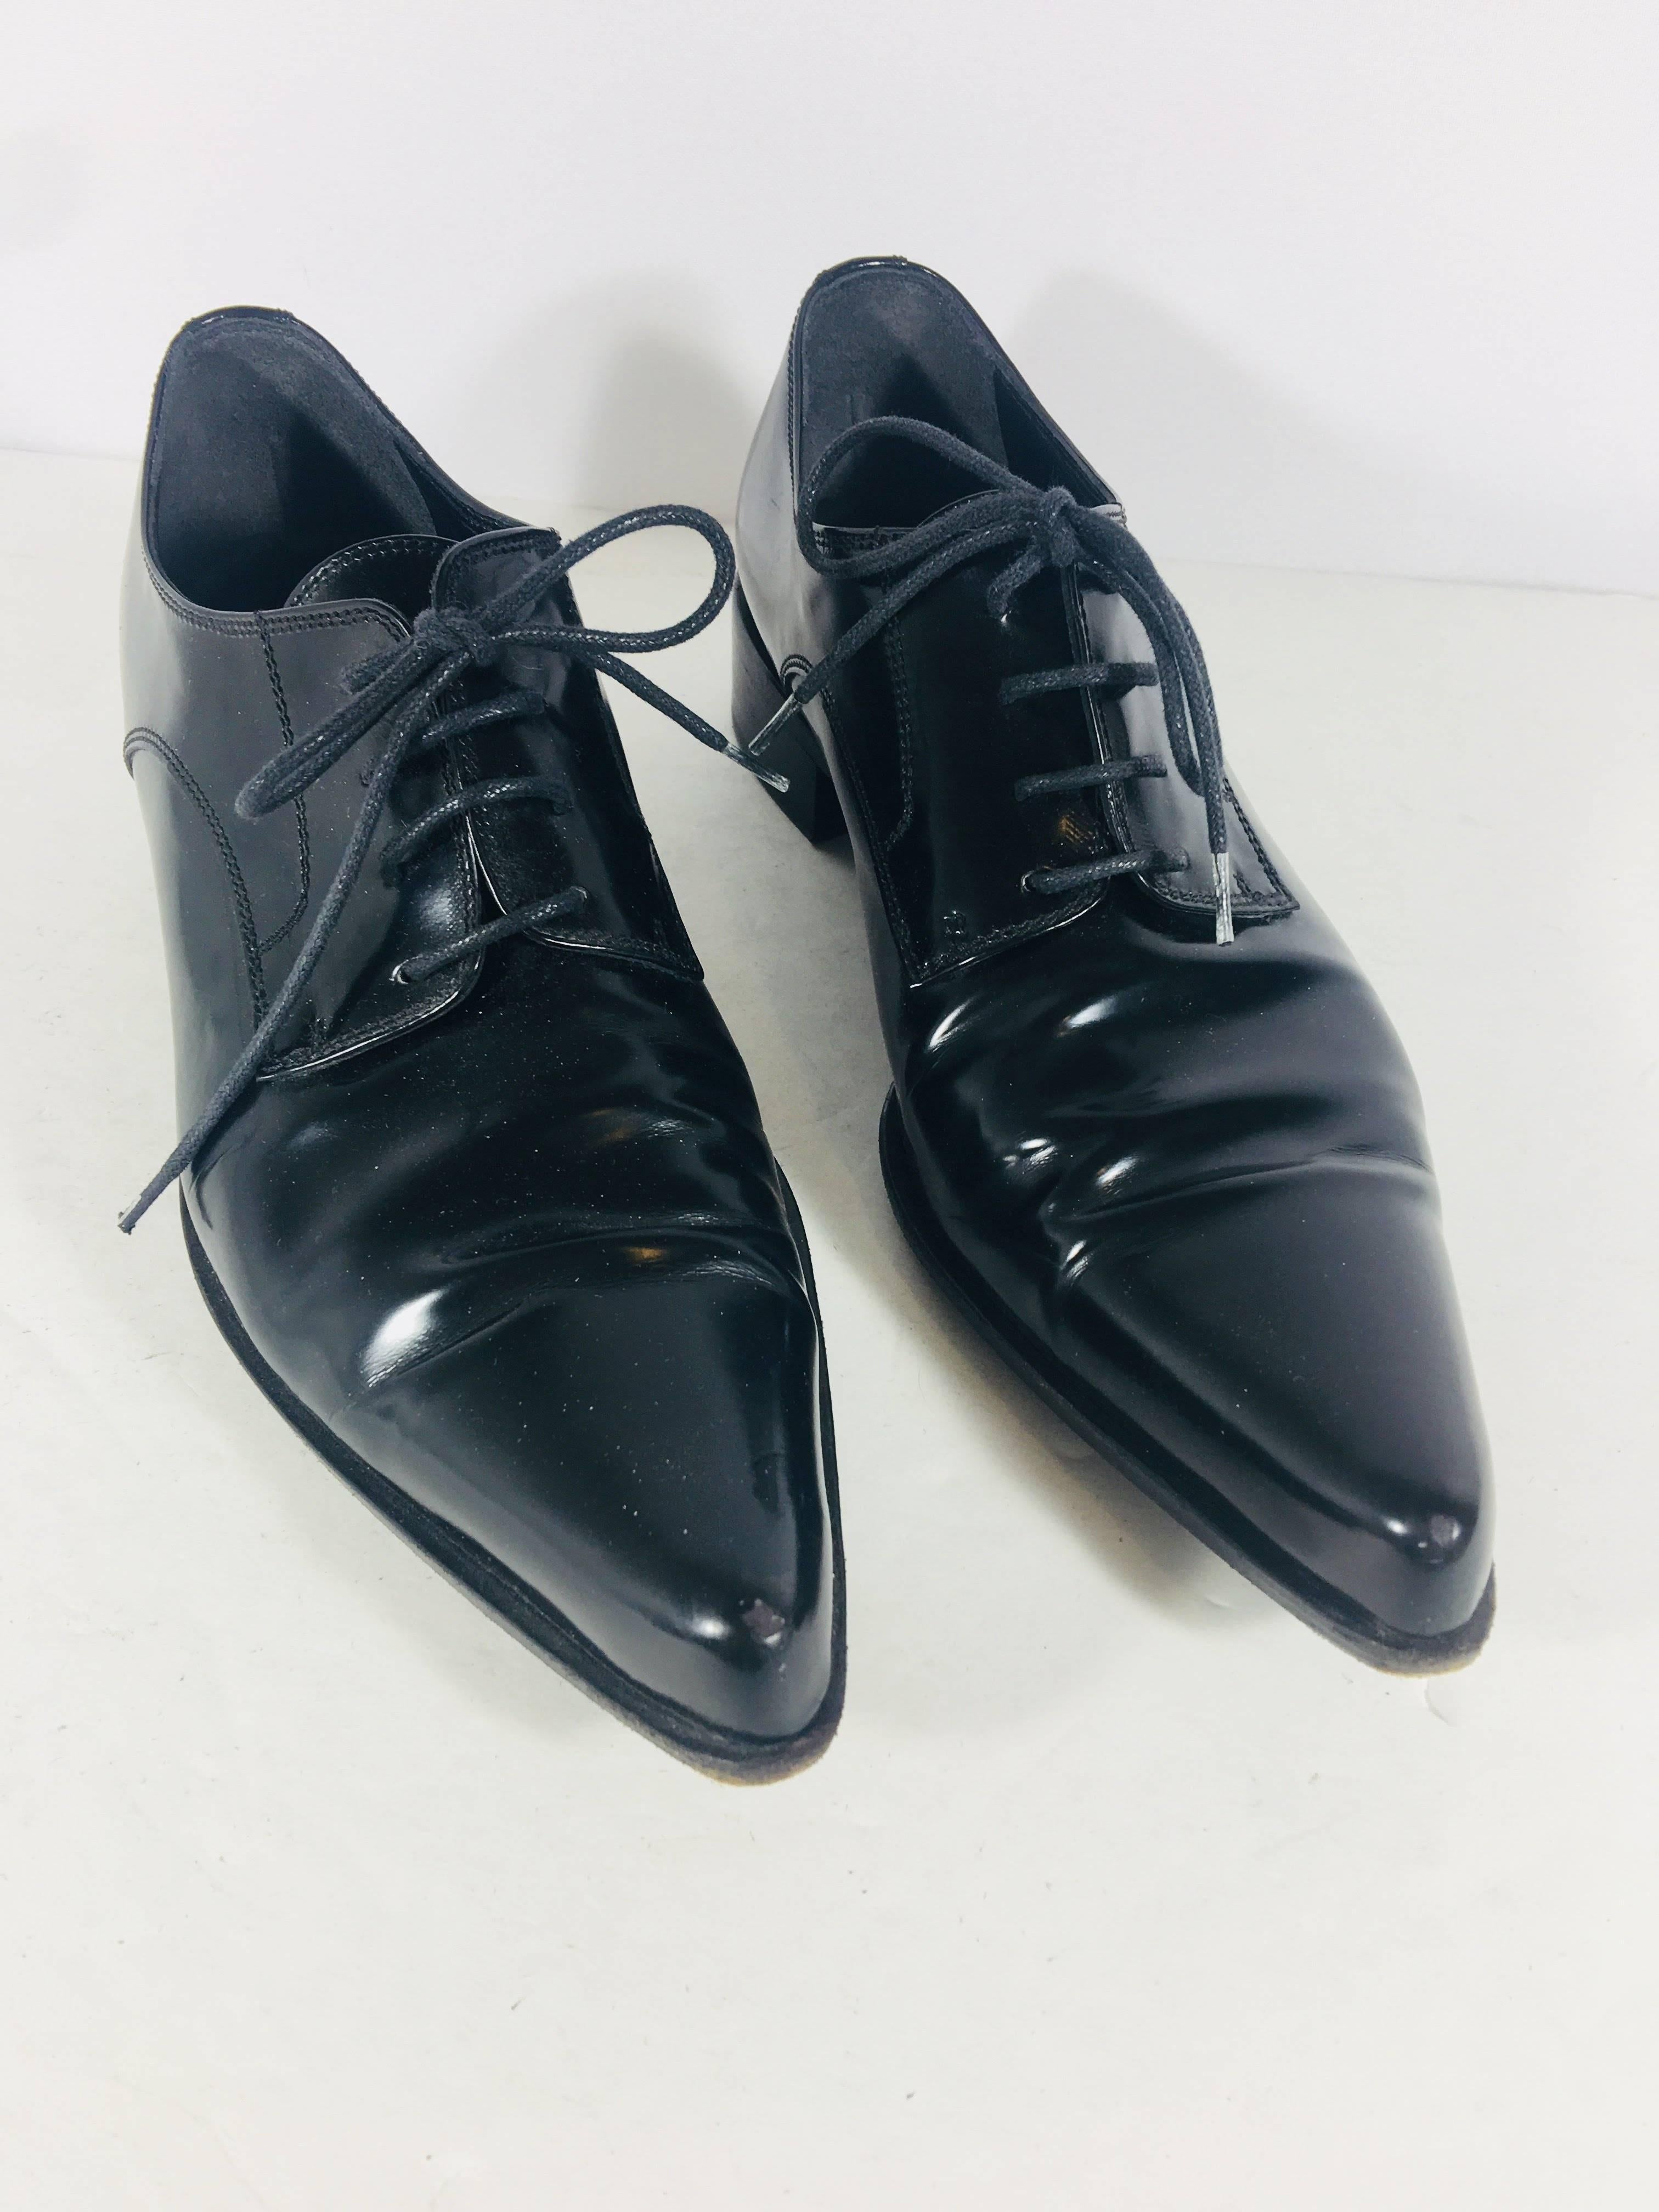 Sergio Rossi Lace up Pointed Toe Patent Leather Oxfords